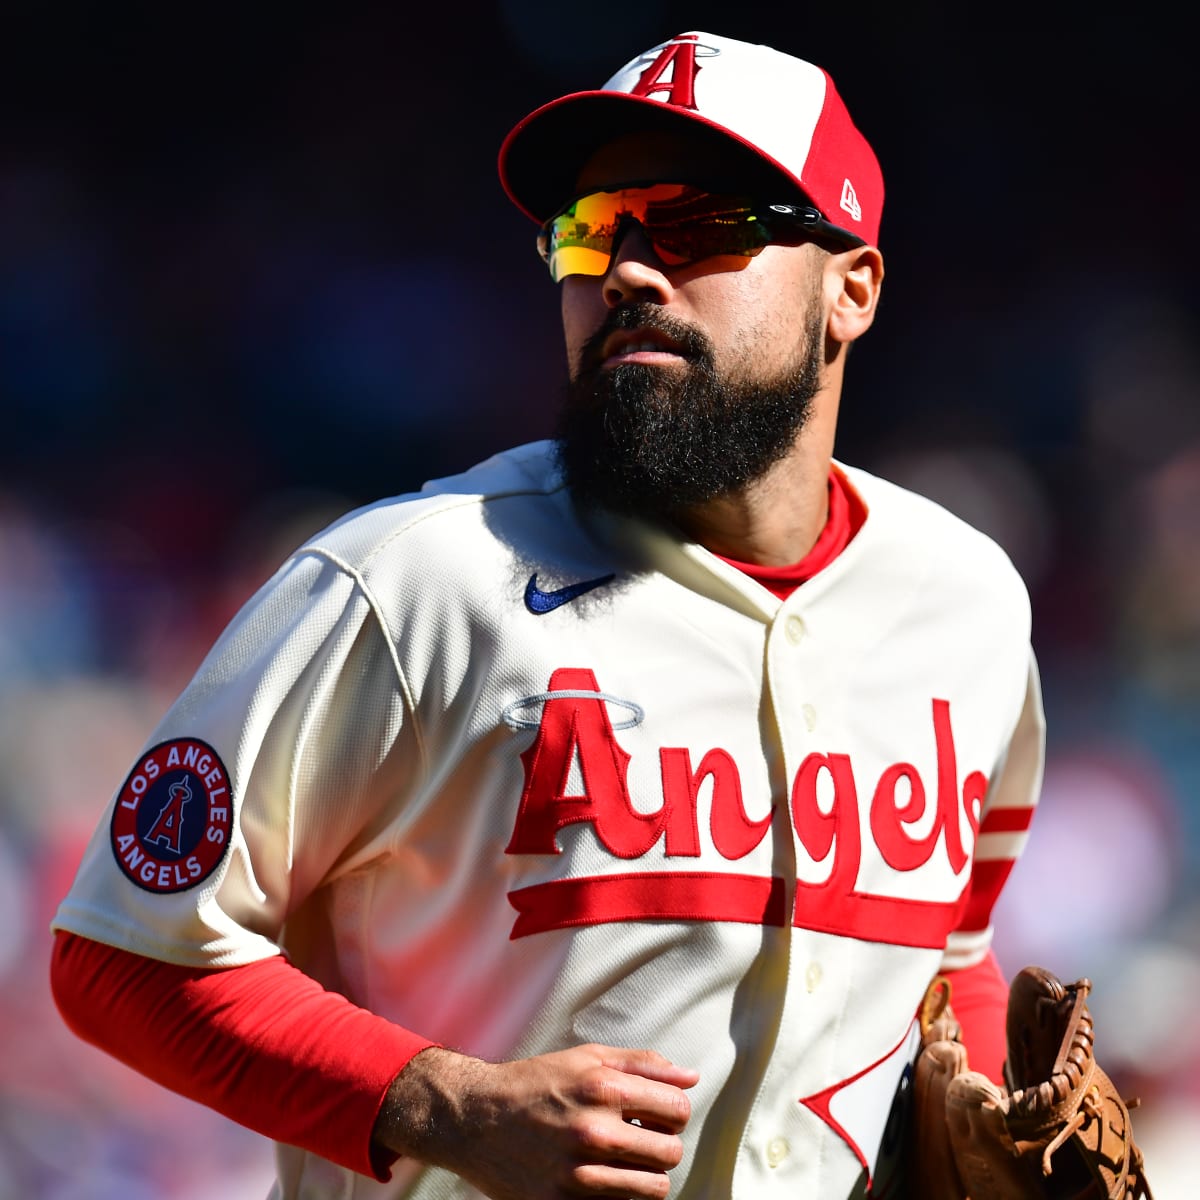 Los Angeles Angels: Signing Anthony Rendon would be a blunder